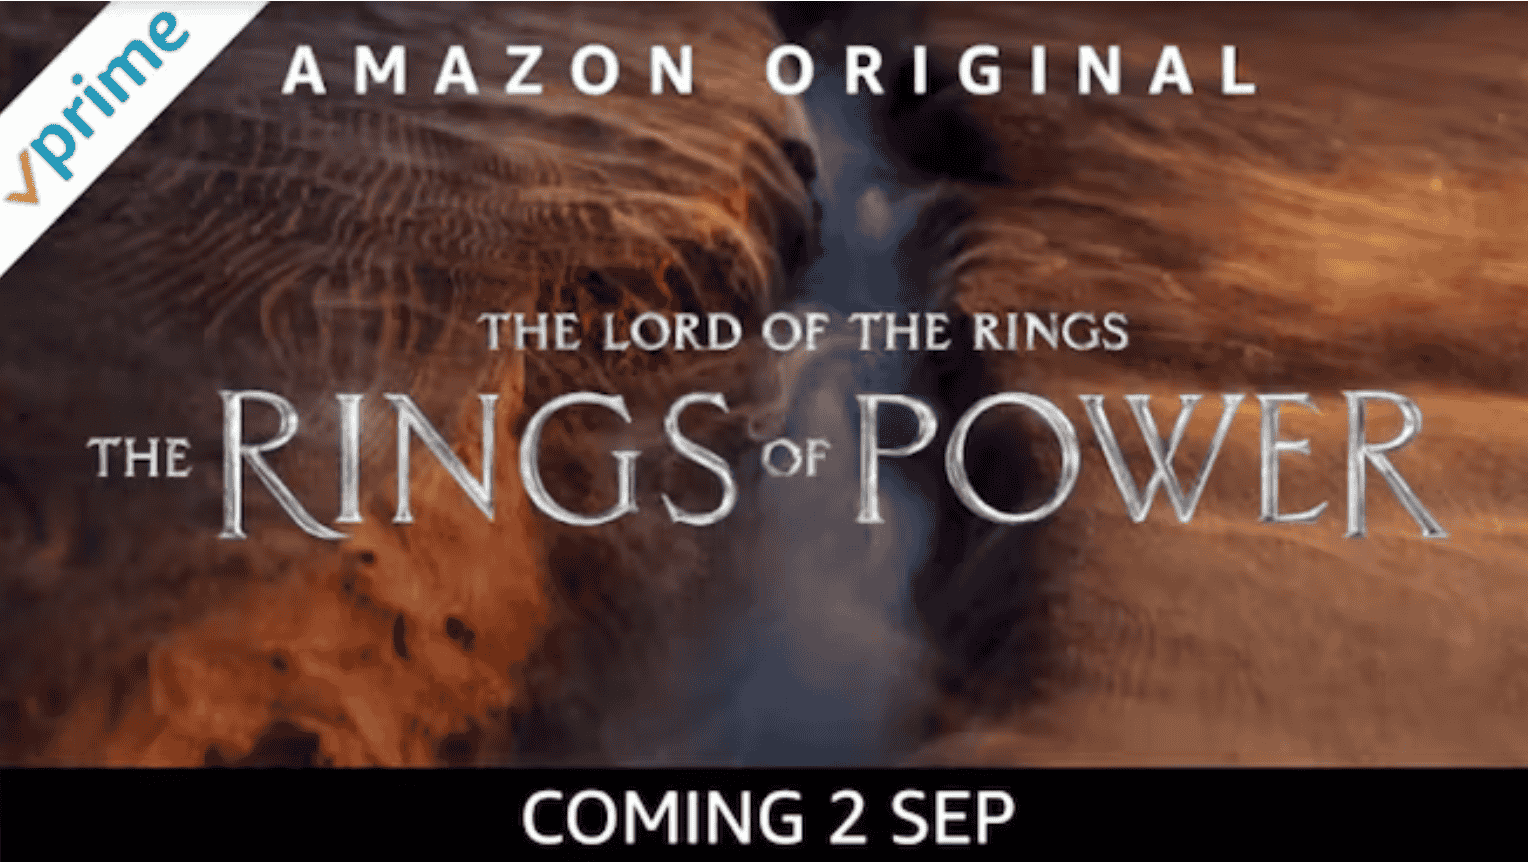 Lord of the rings poster Amazon Prime